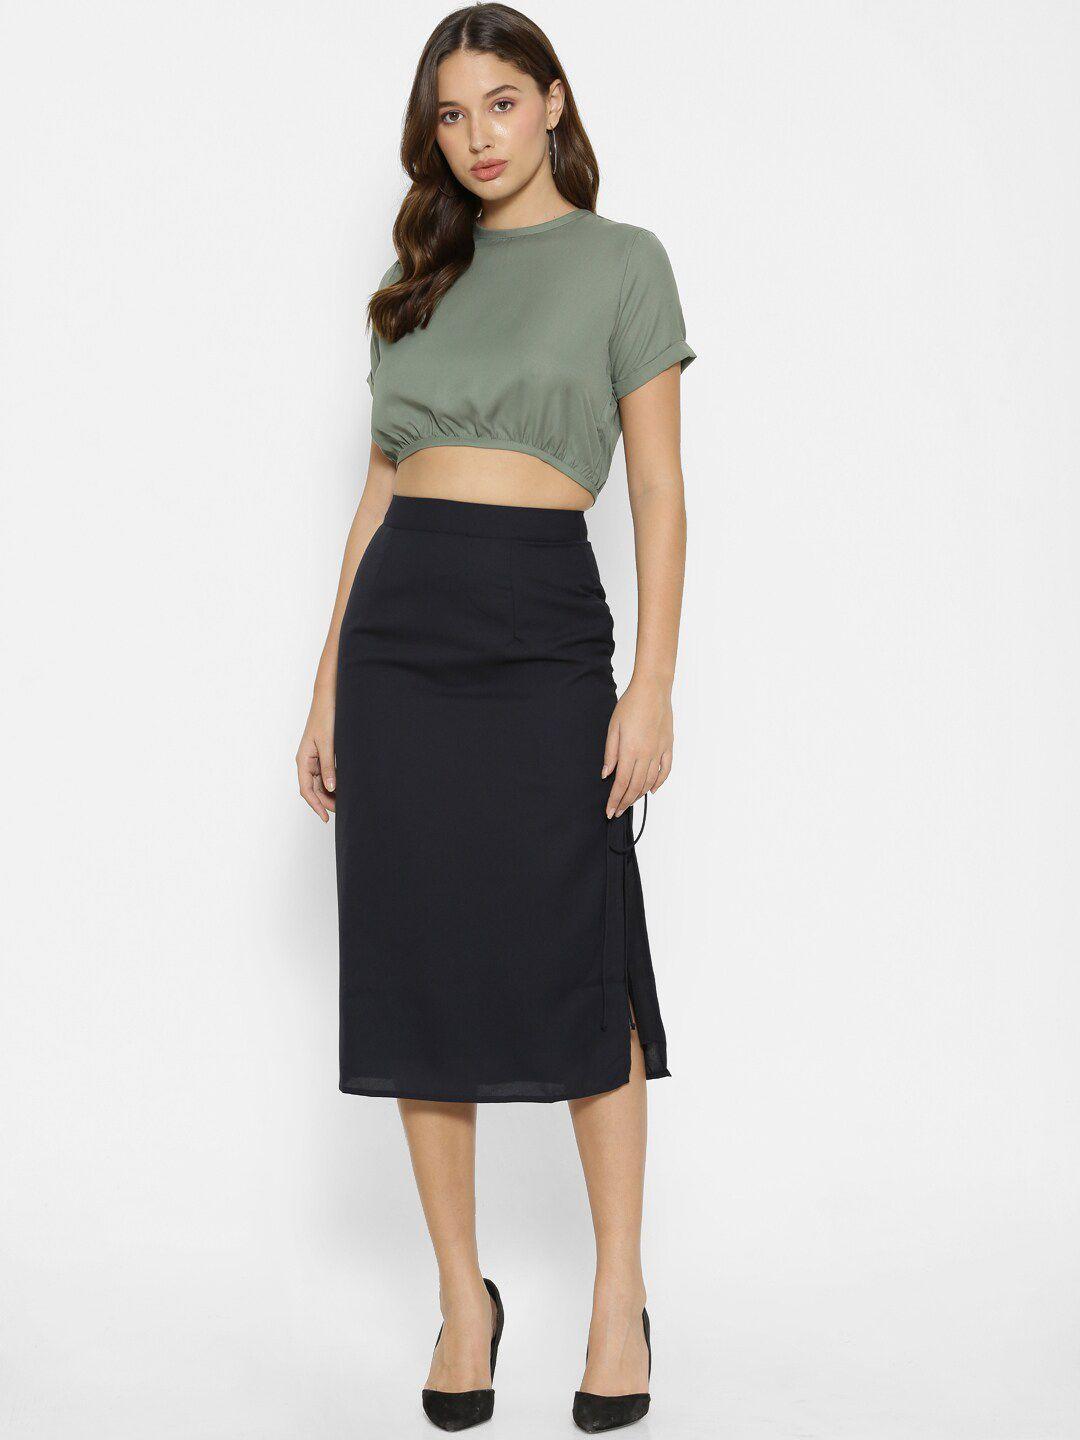 forever 21 women khaki & black crop top with skirt